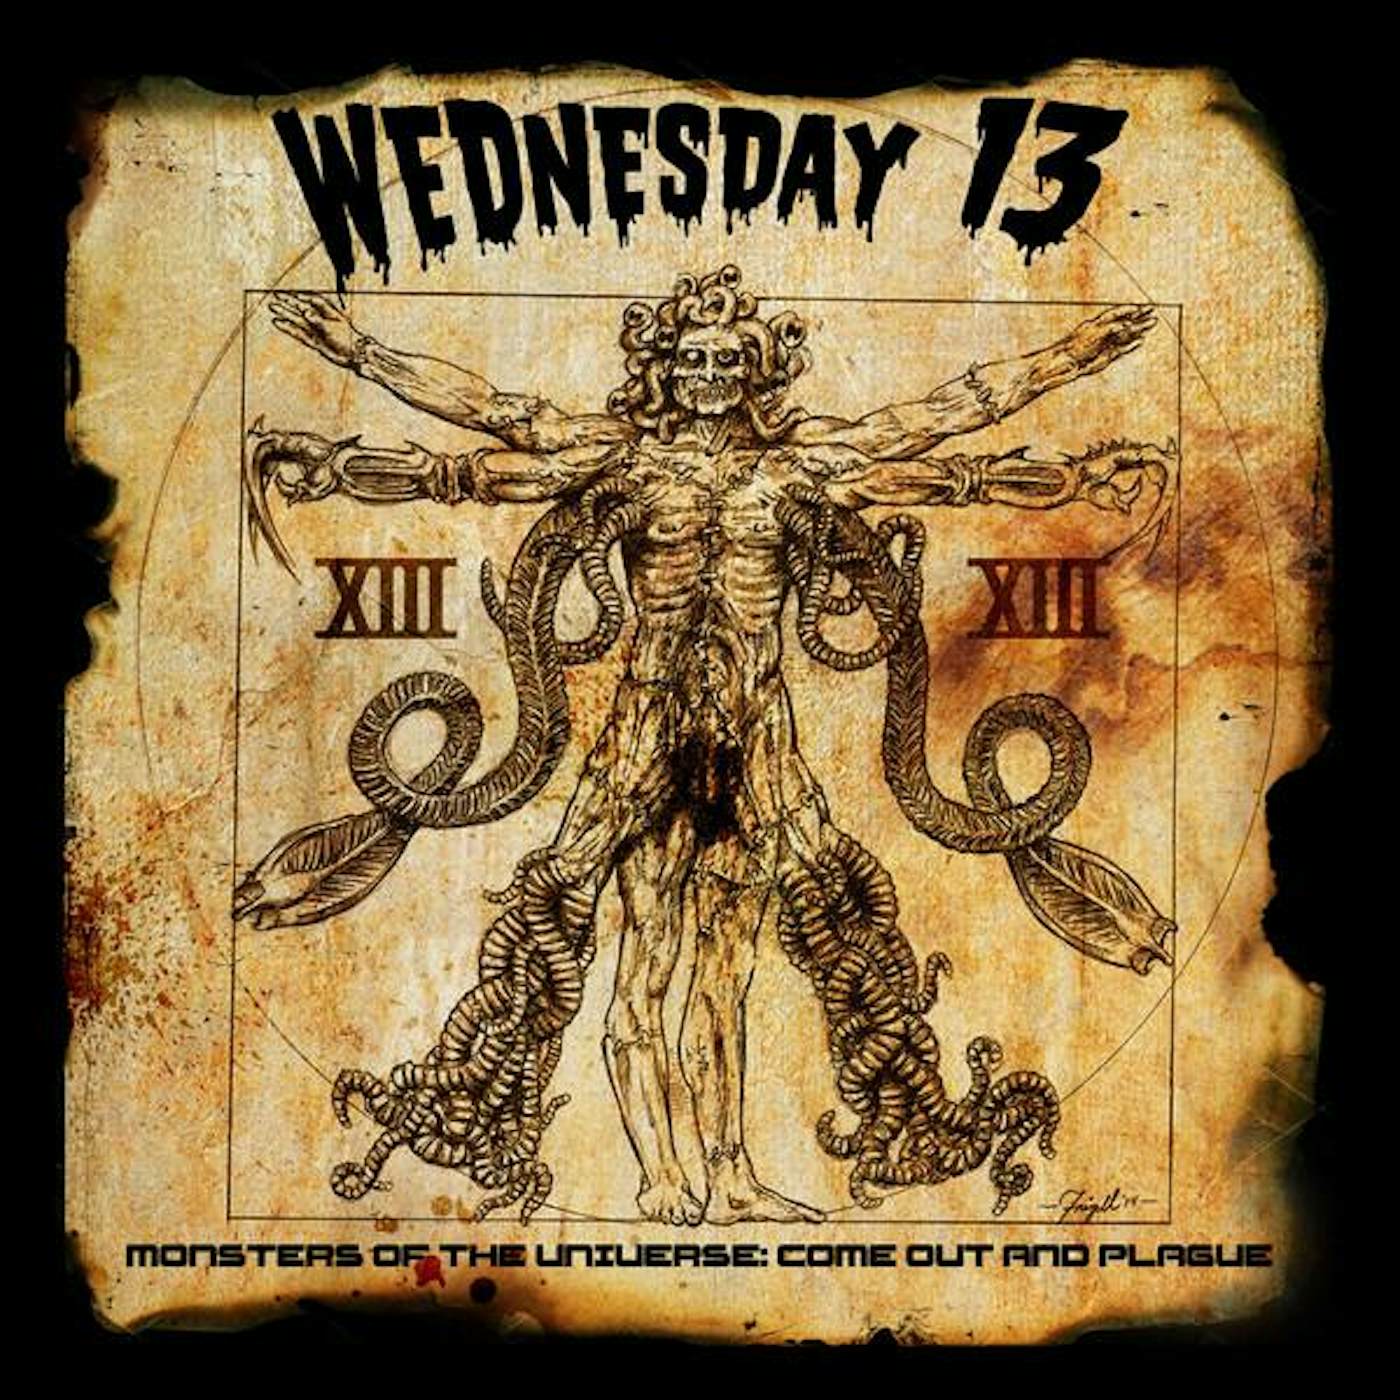 Wednesday 13 MONSTERS OF THE UNIVERSE-COME OUT Vinyl Record